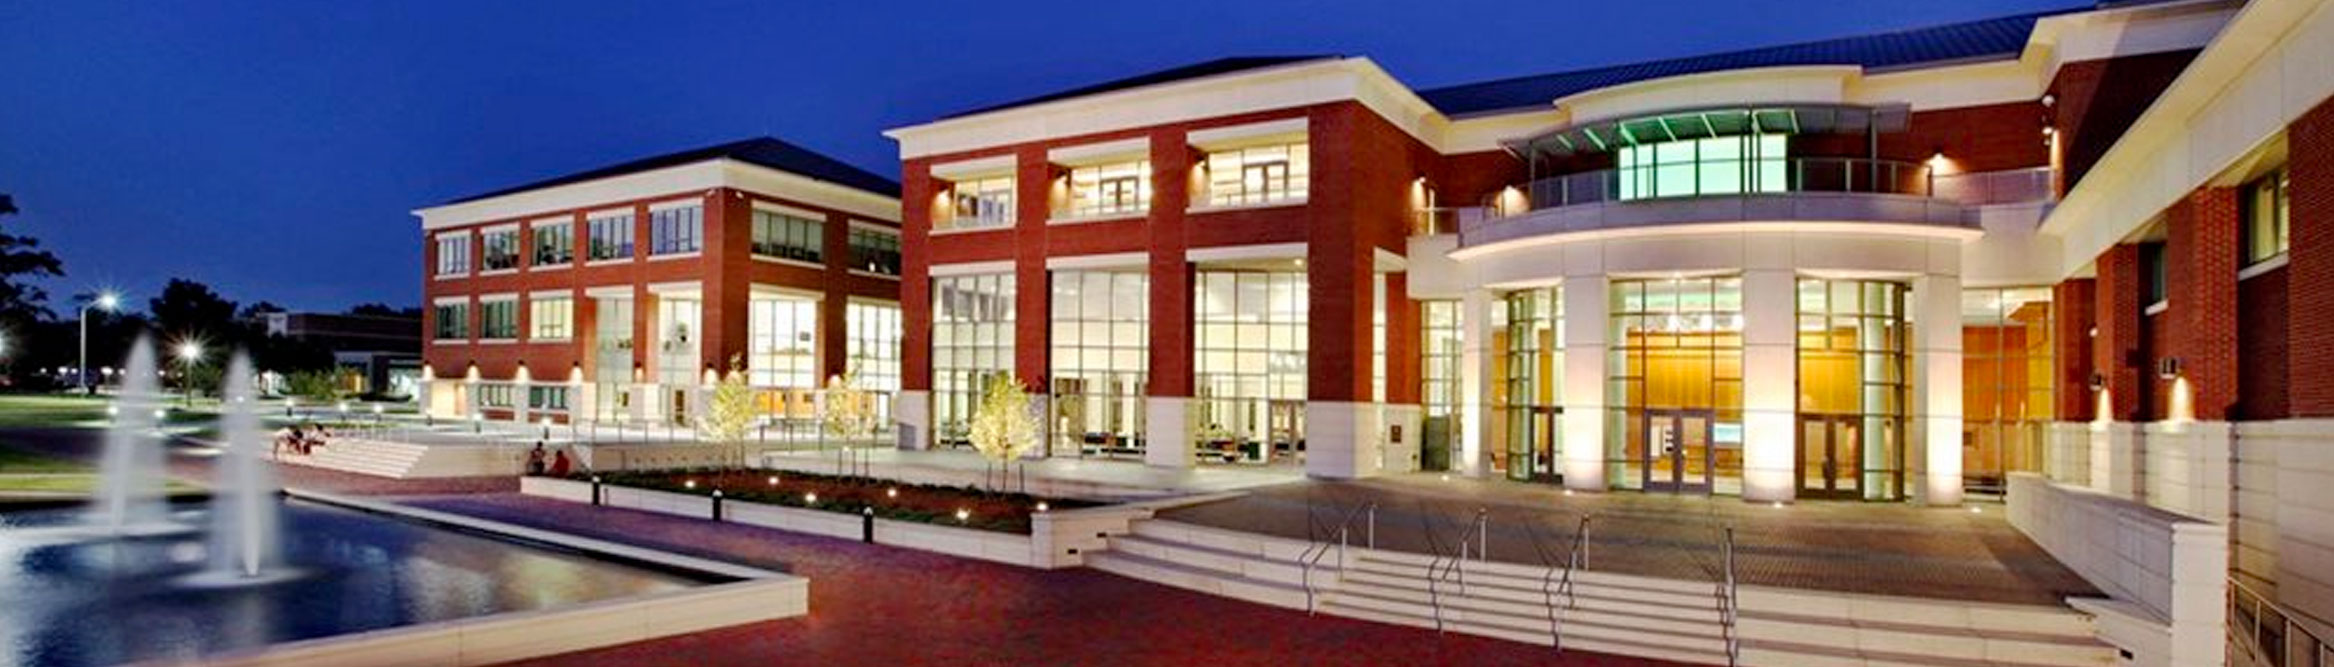 The student center at night photo is used as a cover photo for the university's social media accounts.